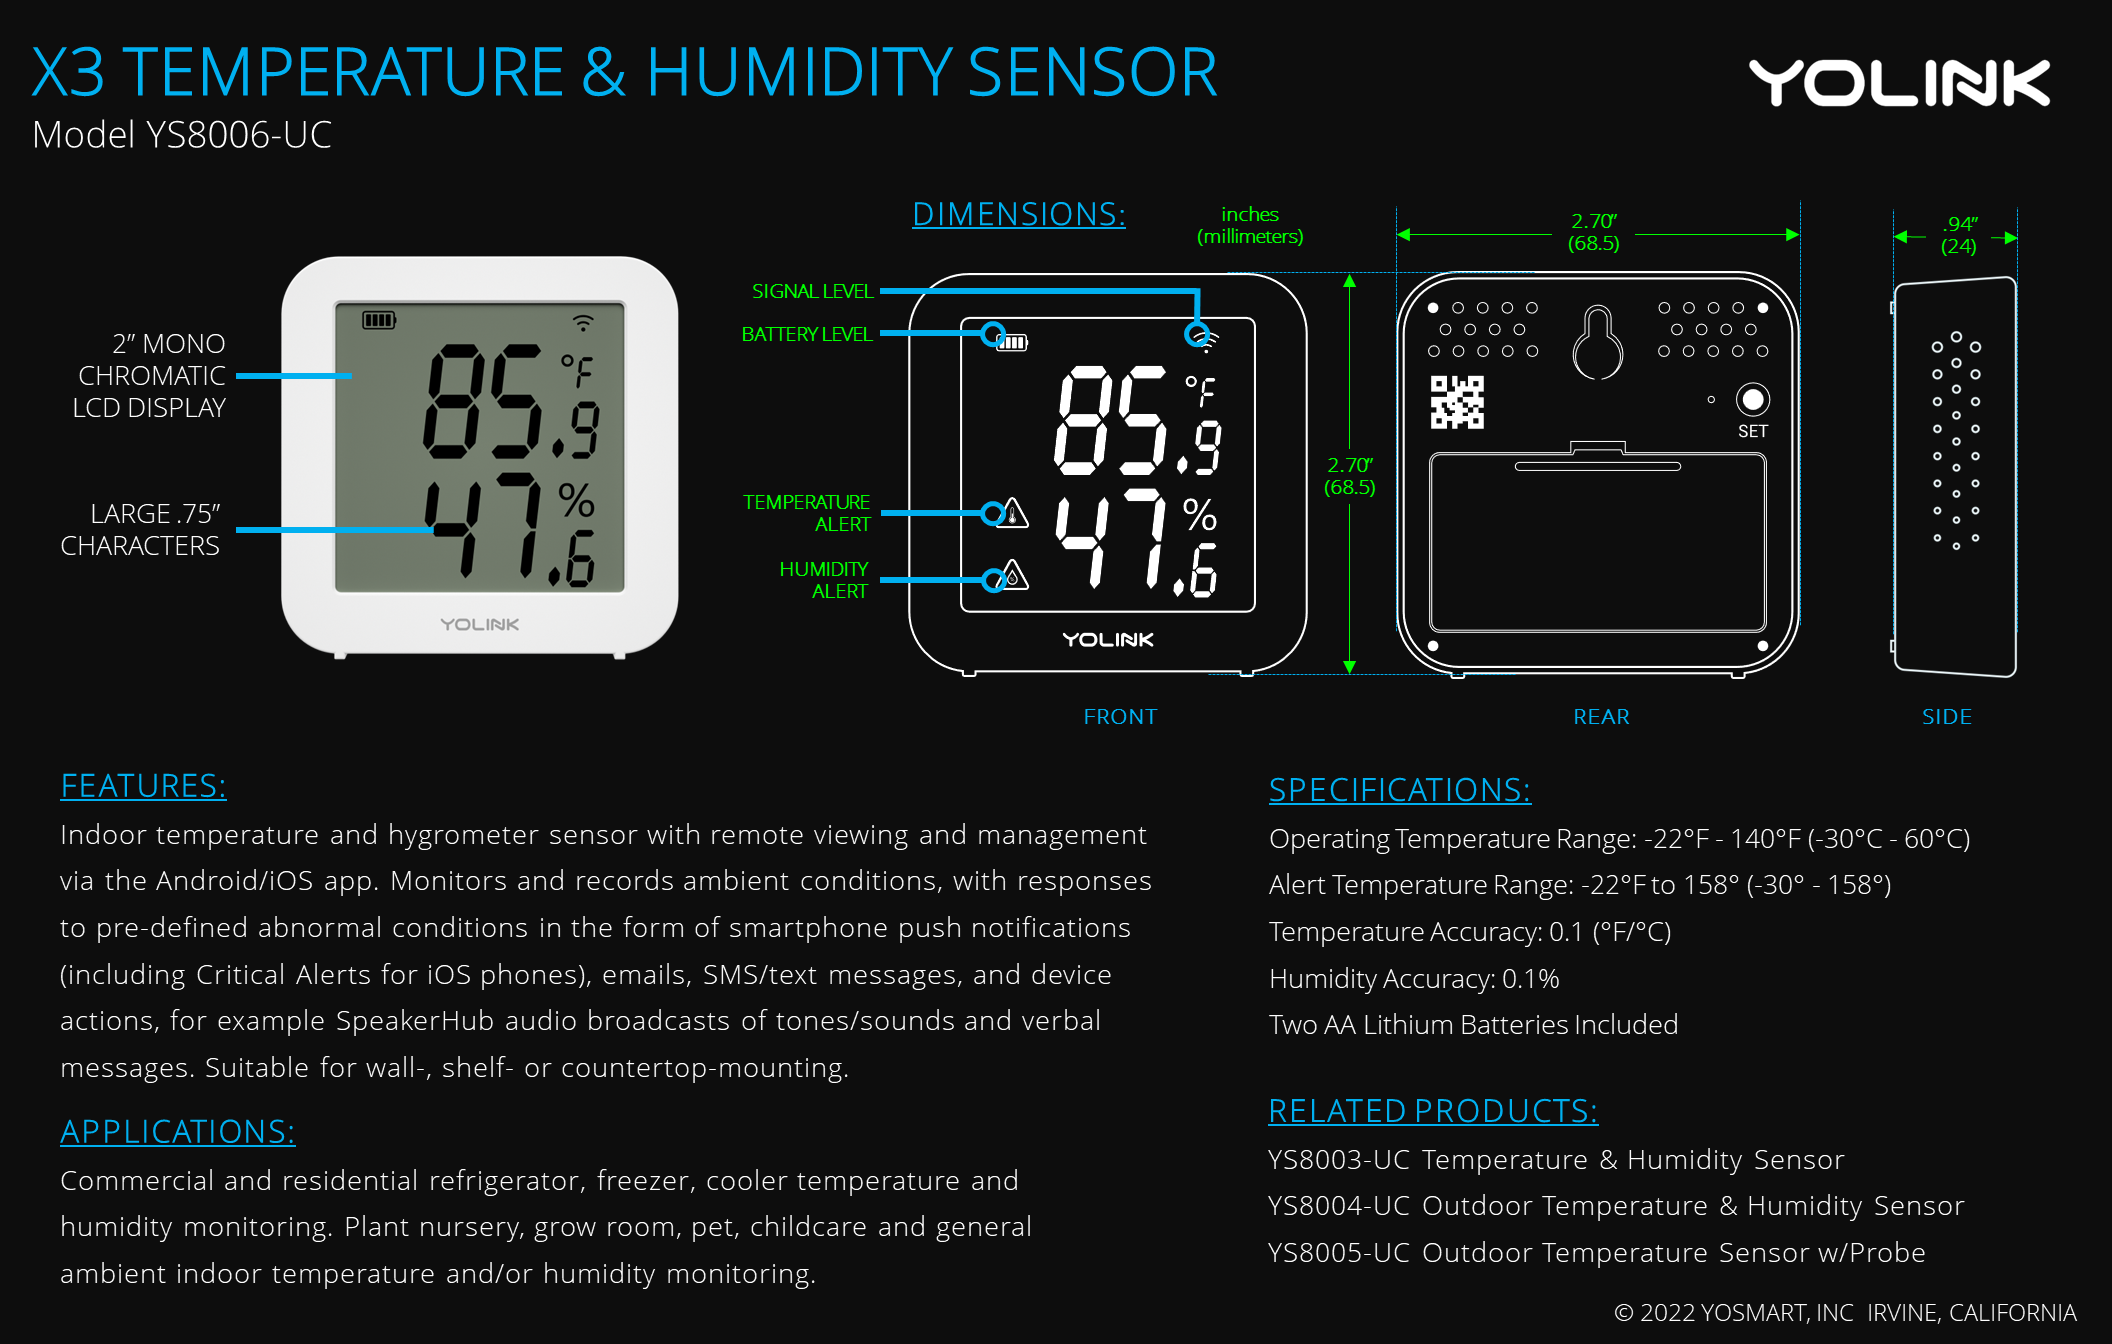 WiFi Thermometer Hygrometer, Smart Humidity Temperature Sensor with App  Notification Alert, Fast Response Humidity Sensor for Home 